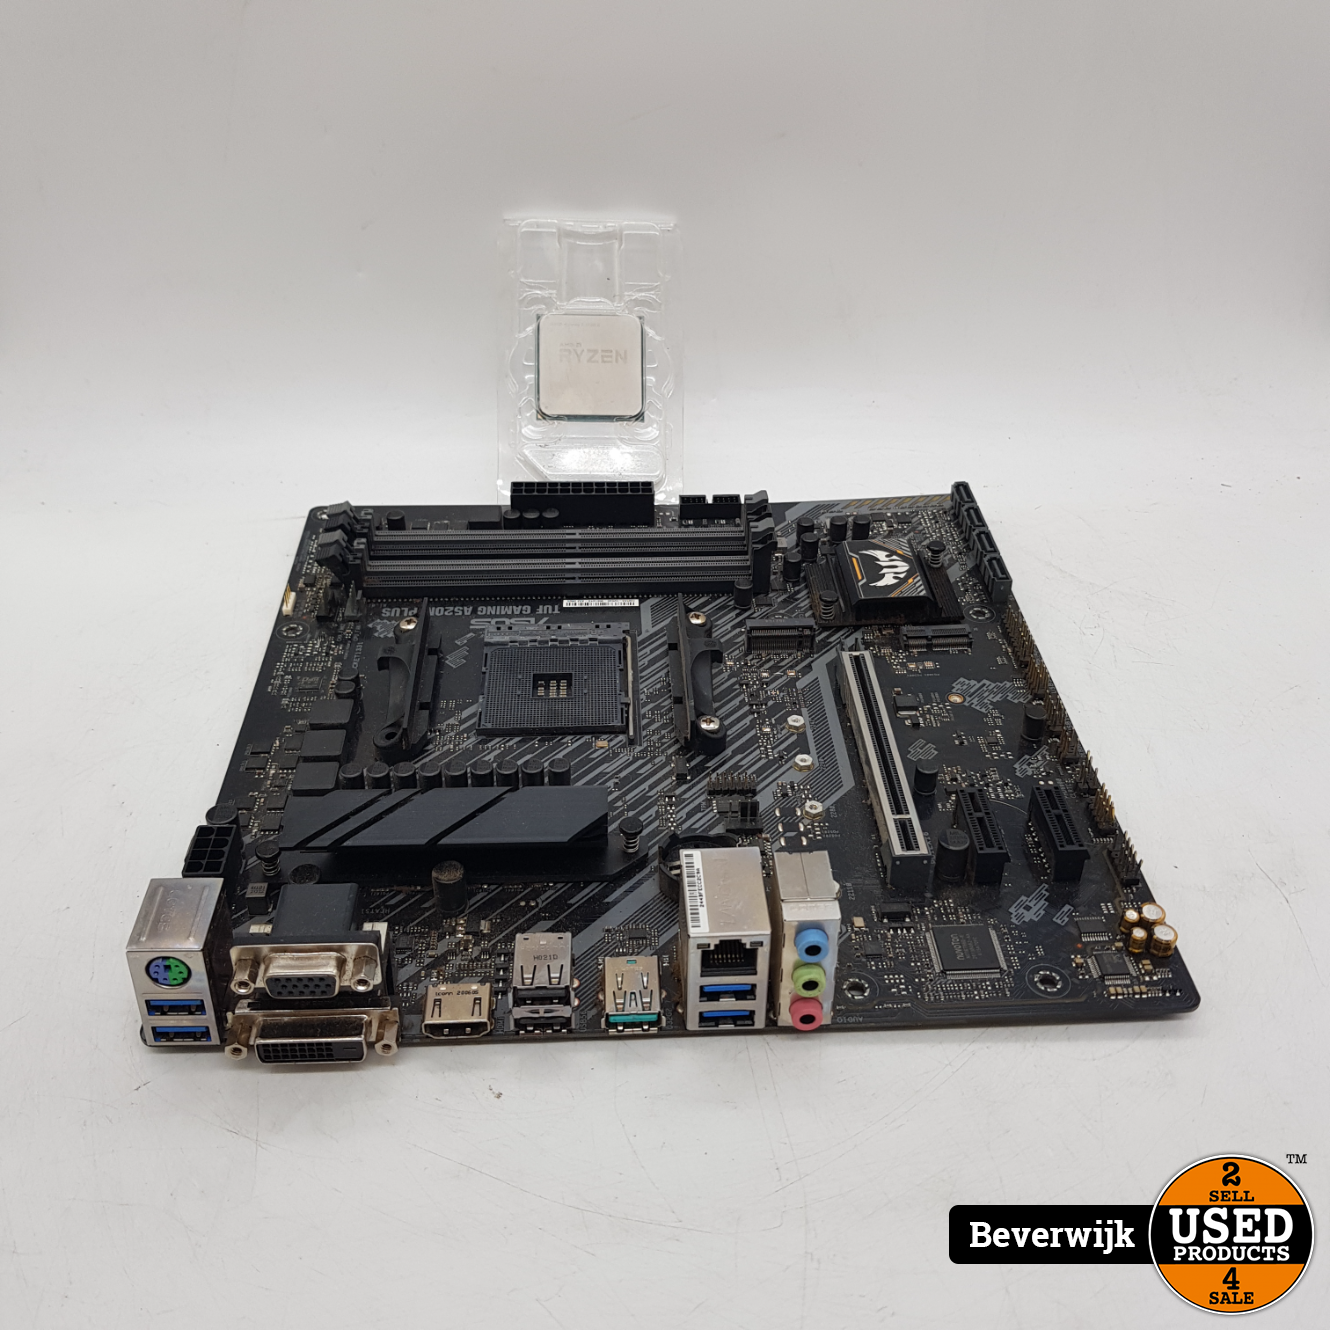 Asus Tuf Gaming A520M-Plus - In Goede Staat - Used Products Beverwijk